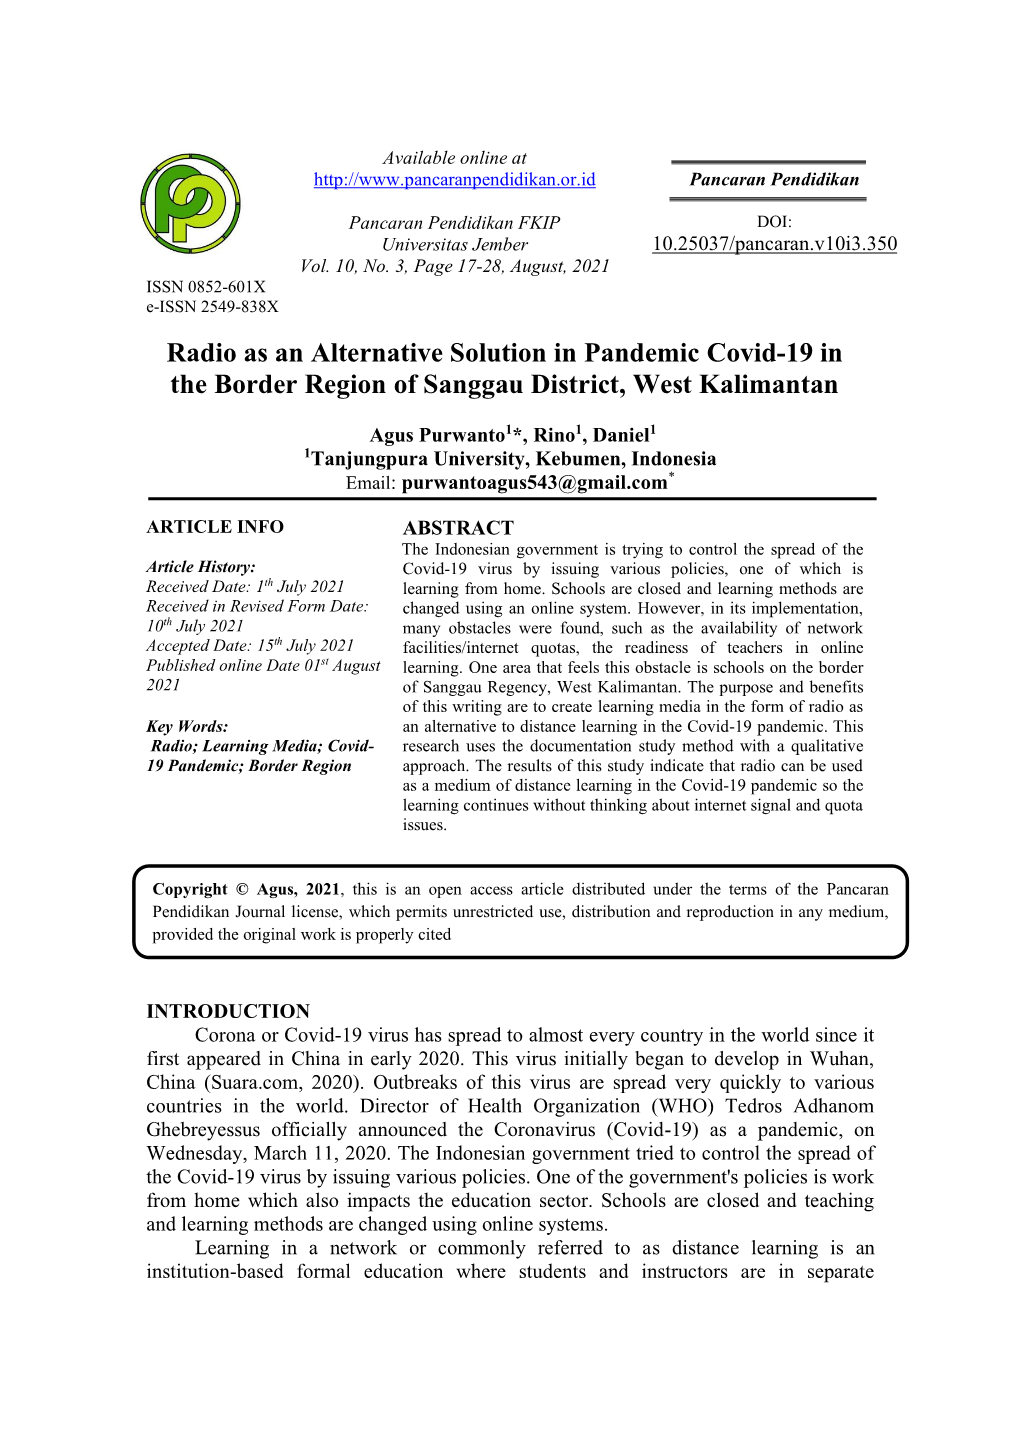 Radio As an Alternative Solution in Pandemic Covid-19 in the Border Region of Sanggau District, West Kalimantan